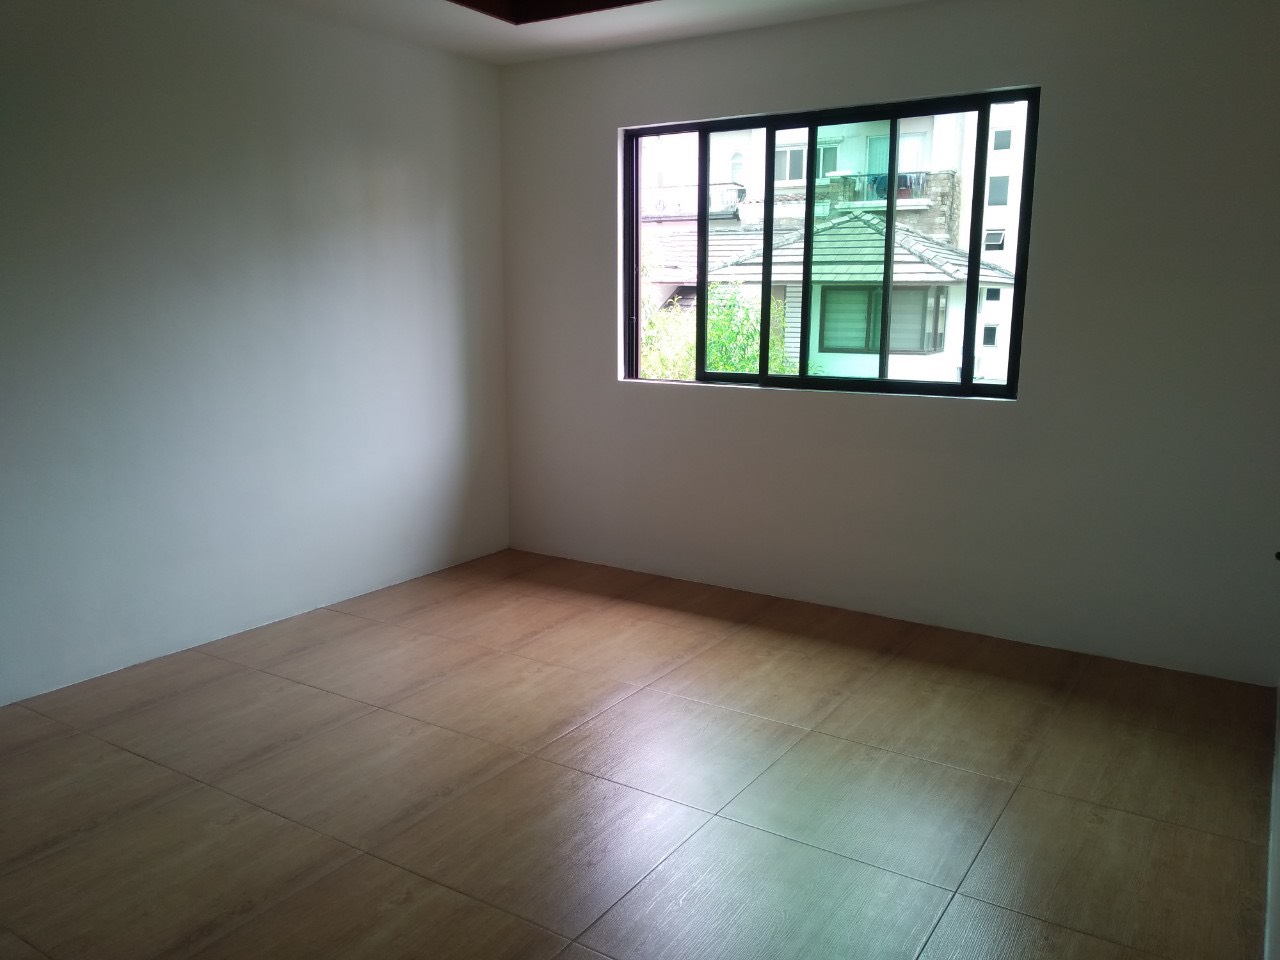 5 Bedrooms House For Rent, McKinley Hill Village 14